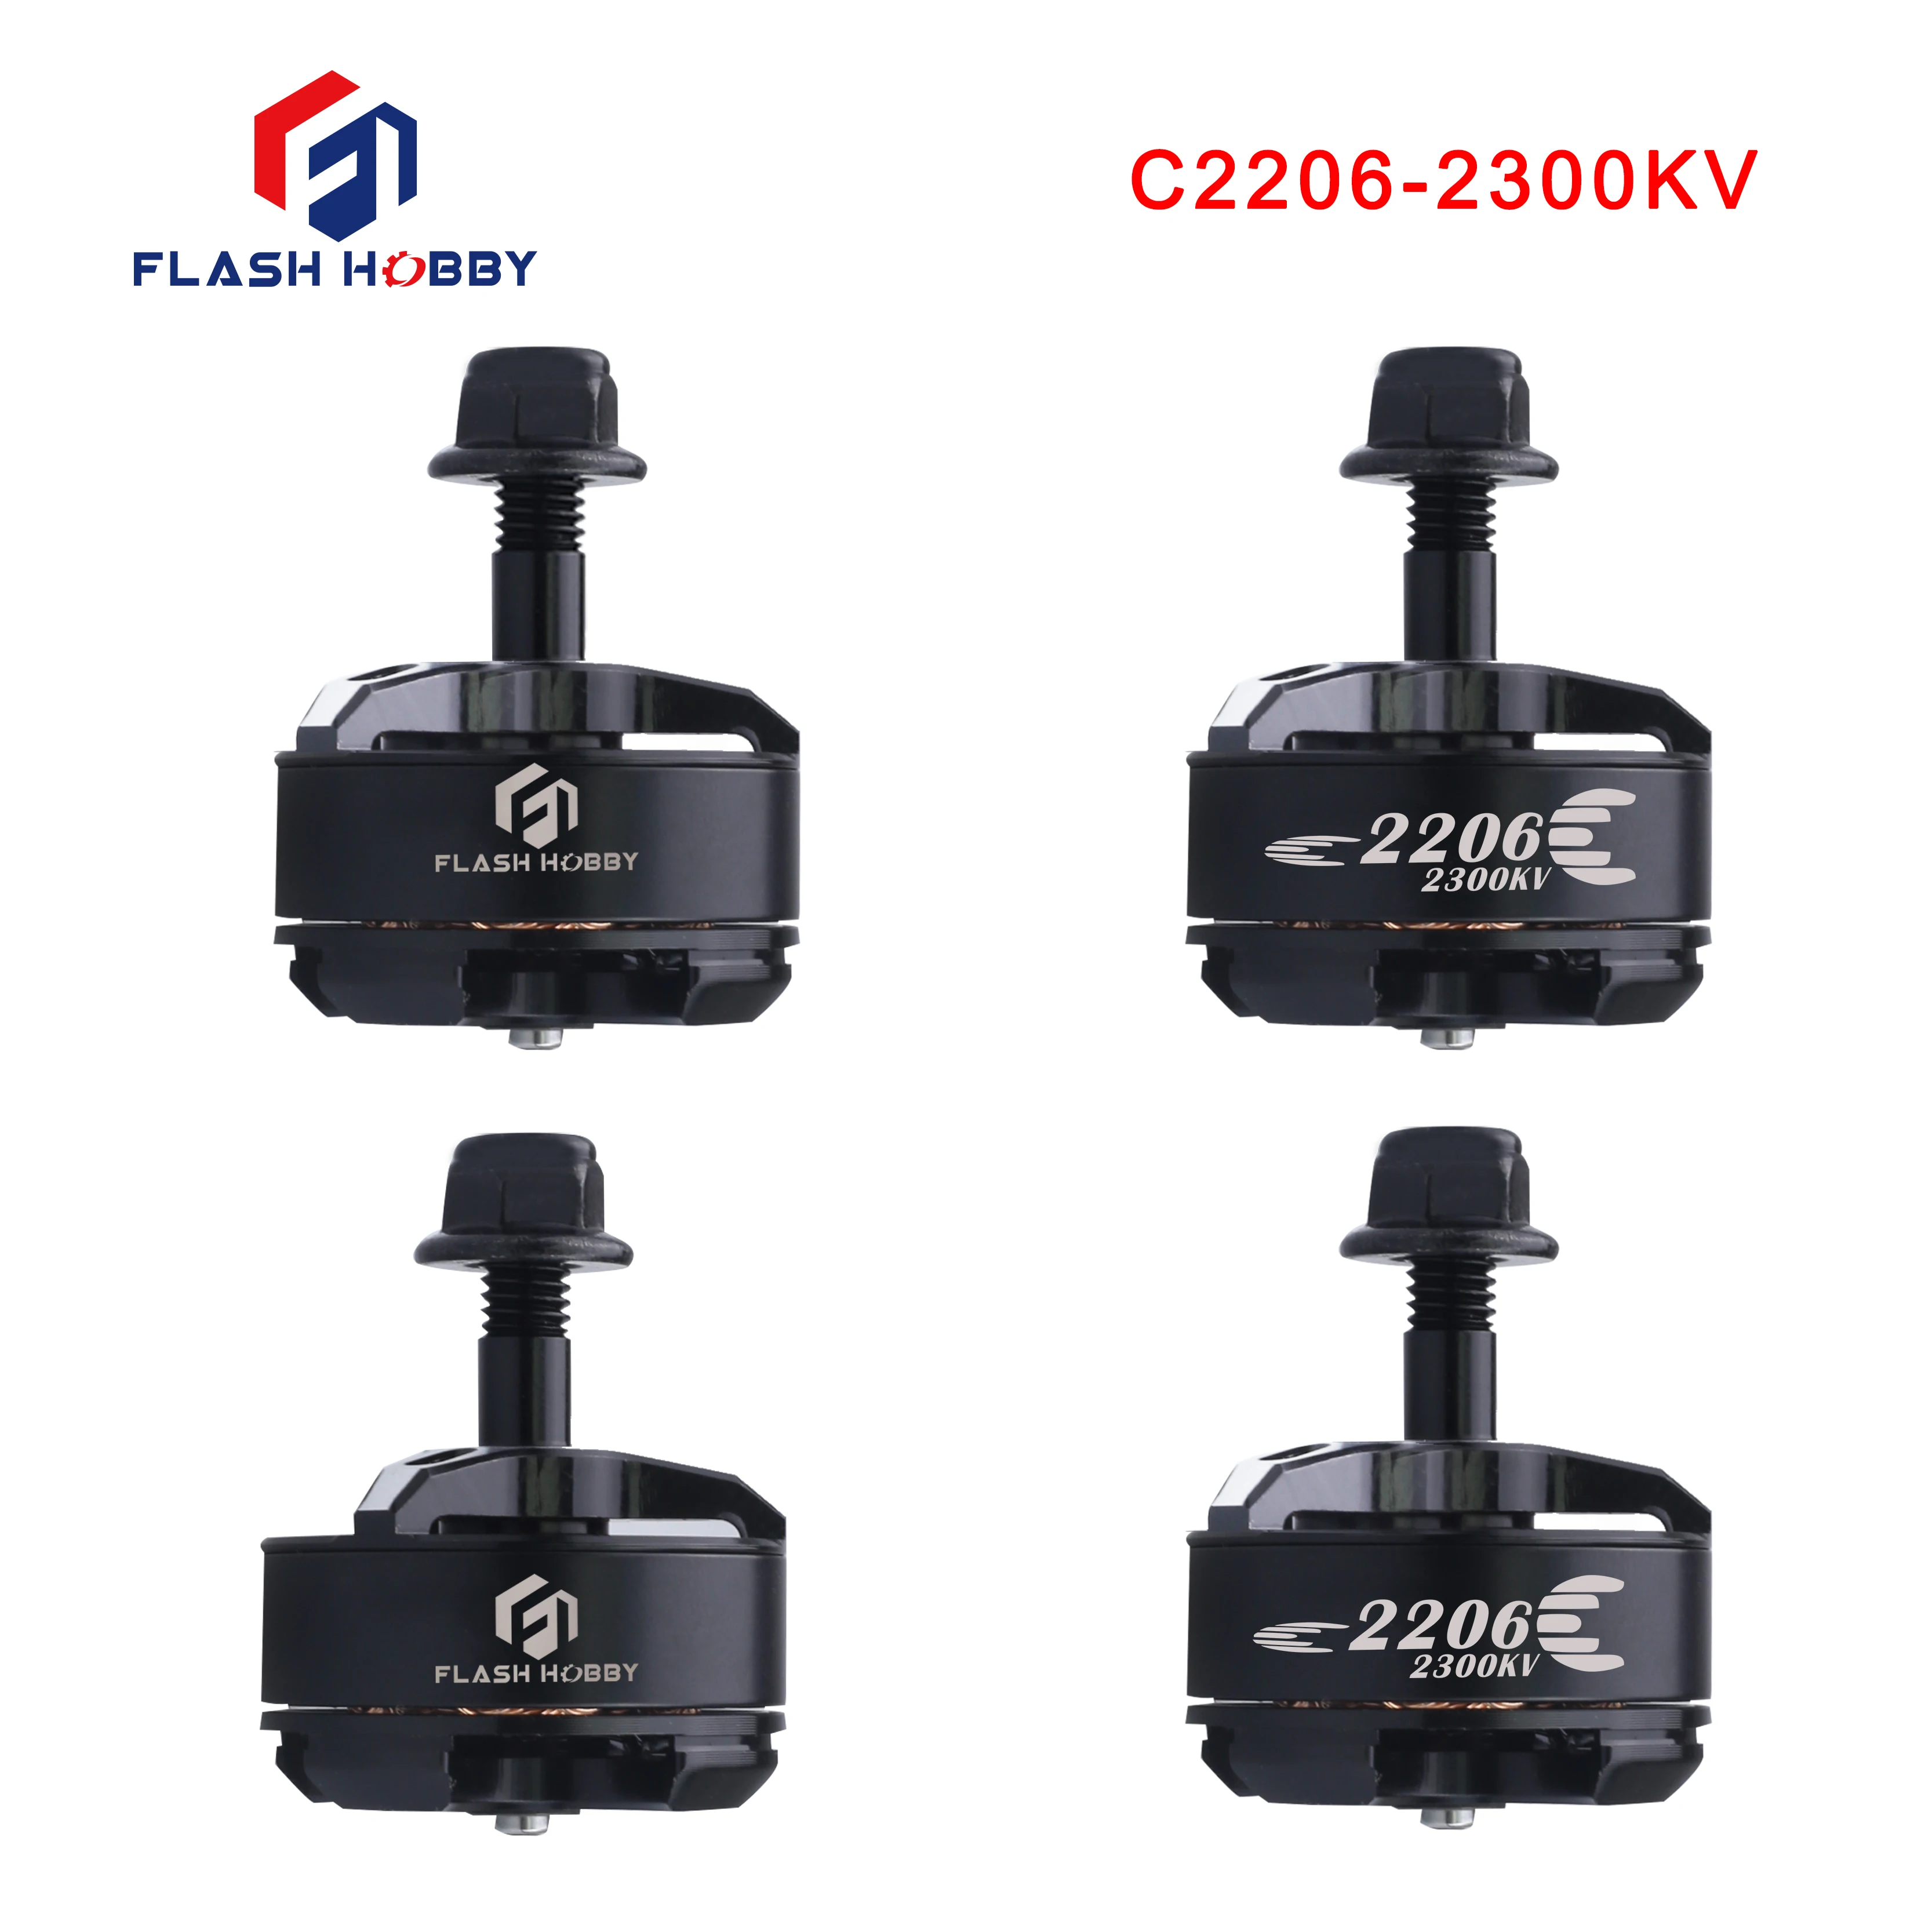 

4pcs FLASH HOBBY 2206 2300KV Motor CW CCW for FPV RACER Quadcopter Kvadrokopter RC Drone Aircraft Brushless Multicopter